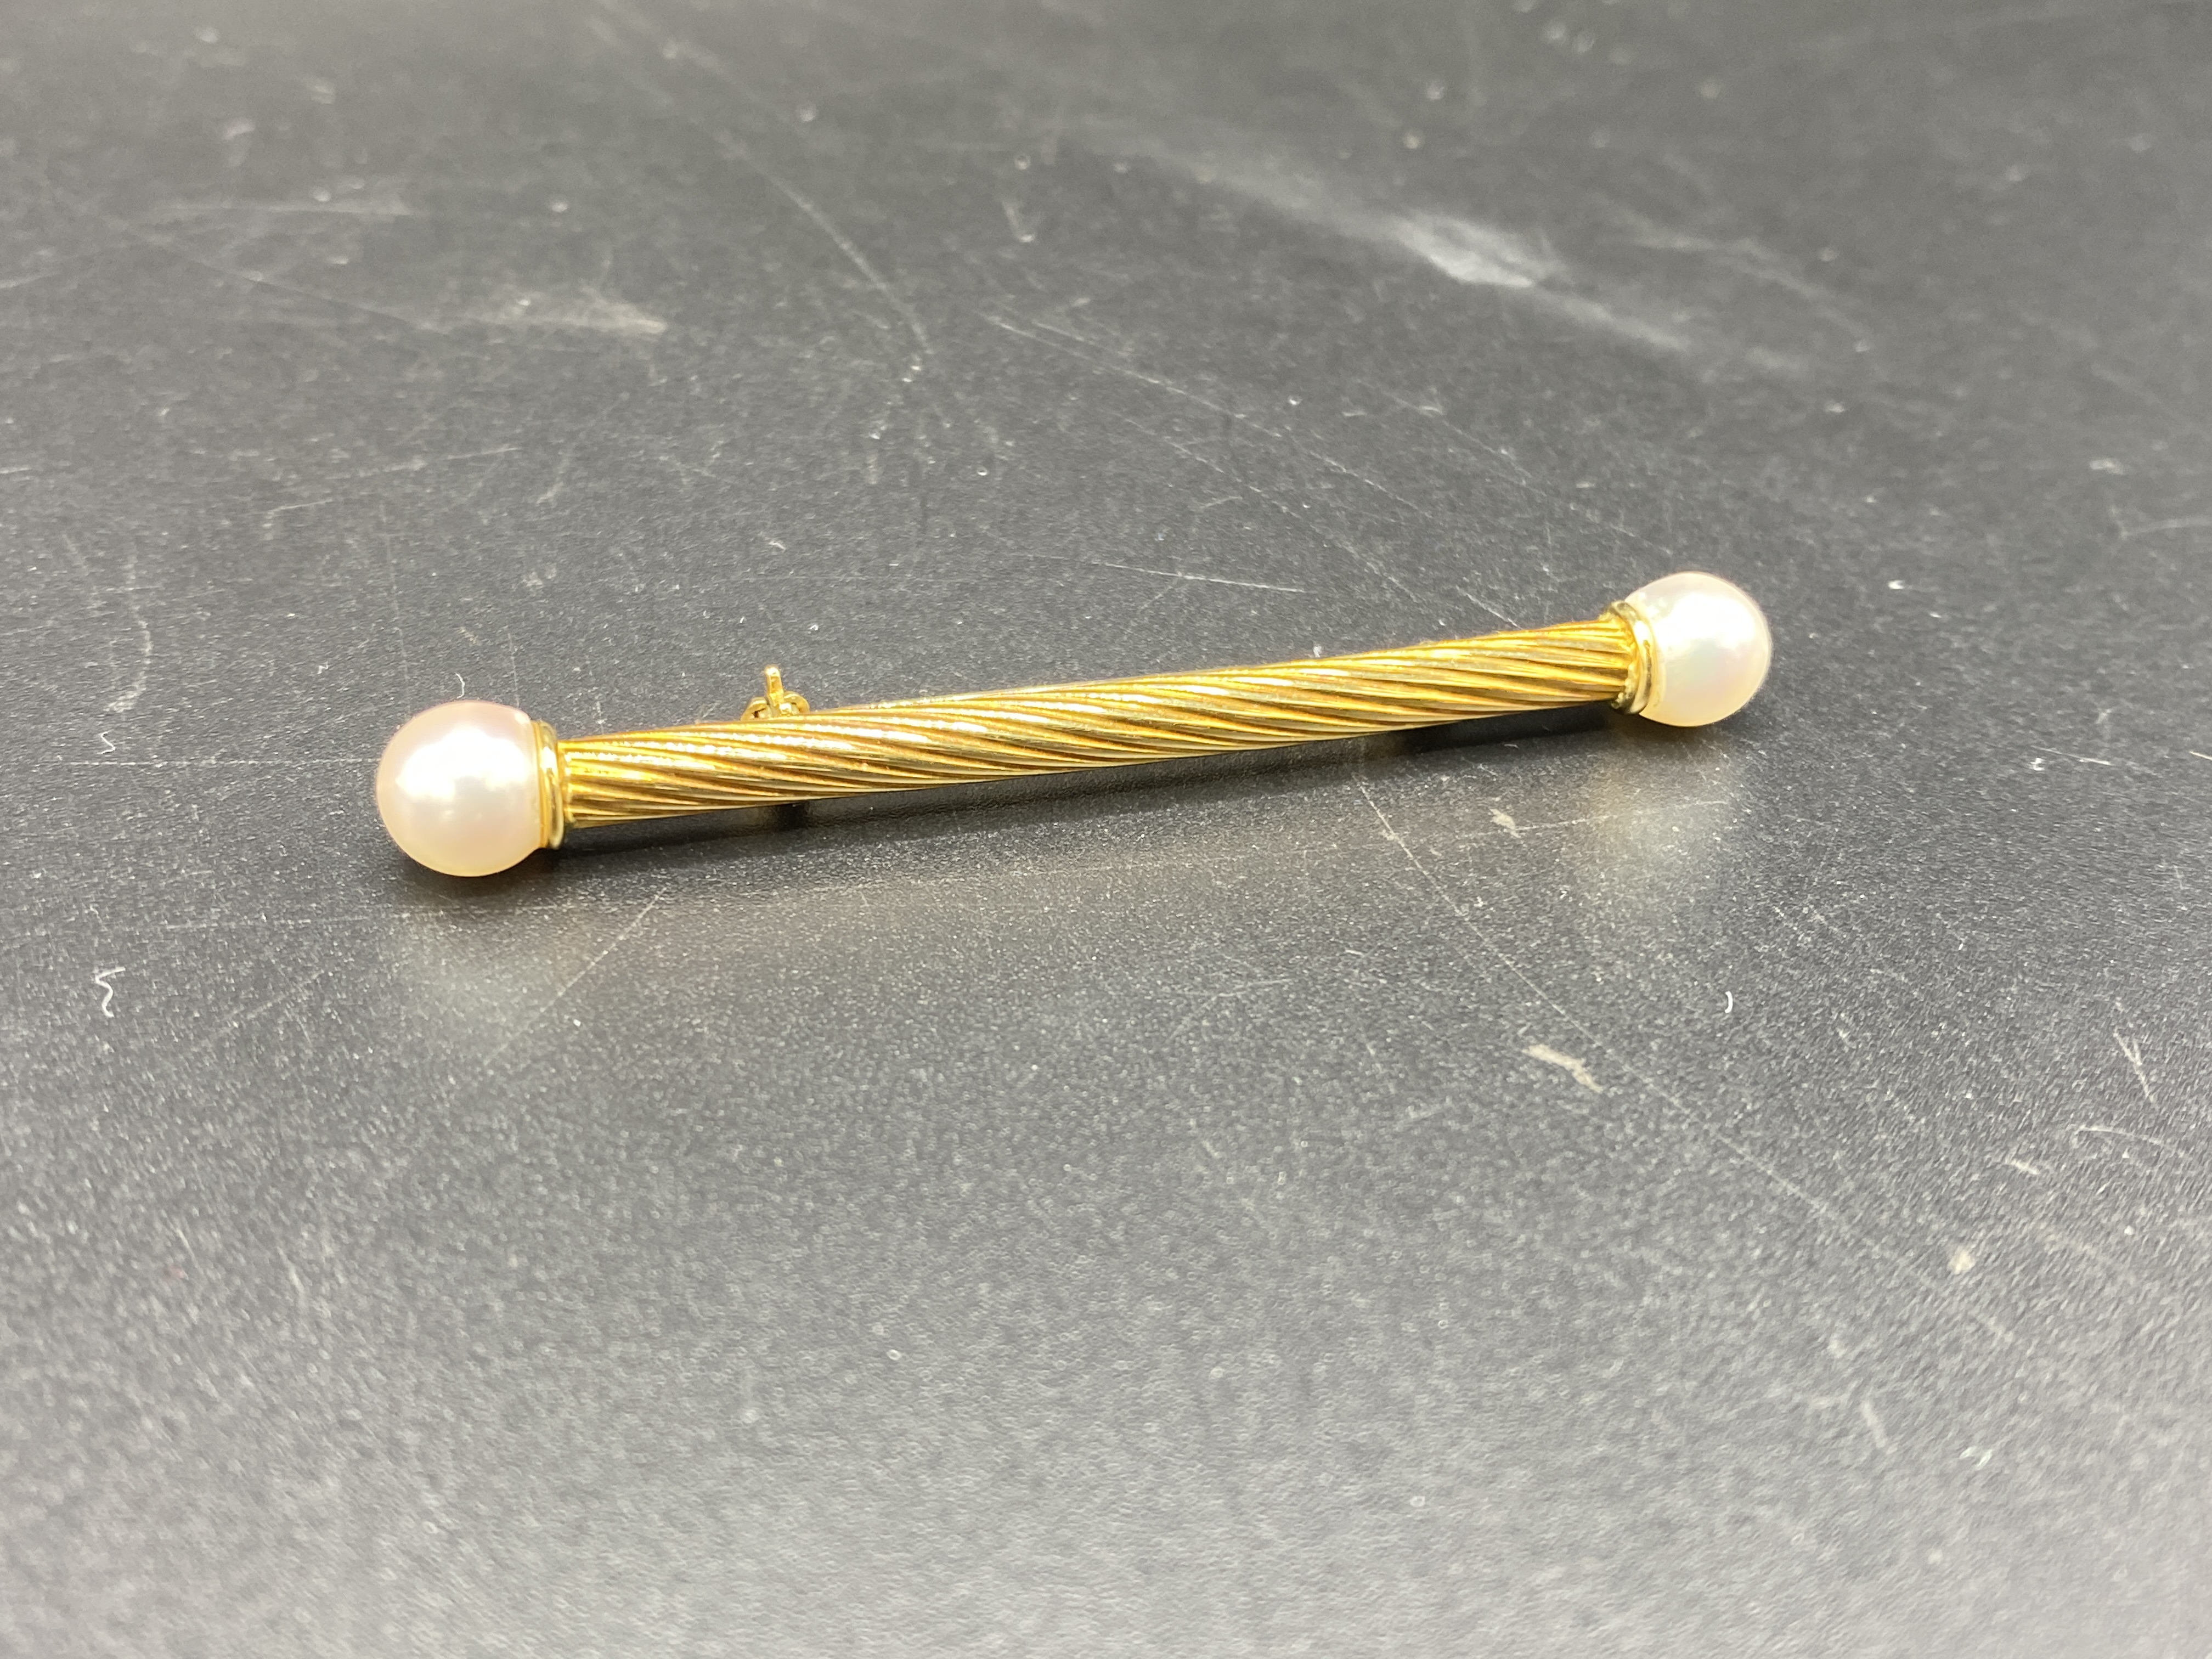 18ct gold brooch set with pearls - Image 2 of 4